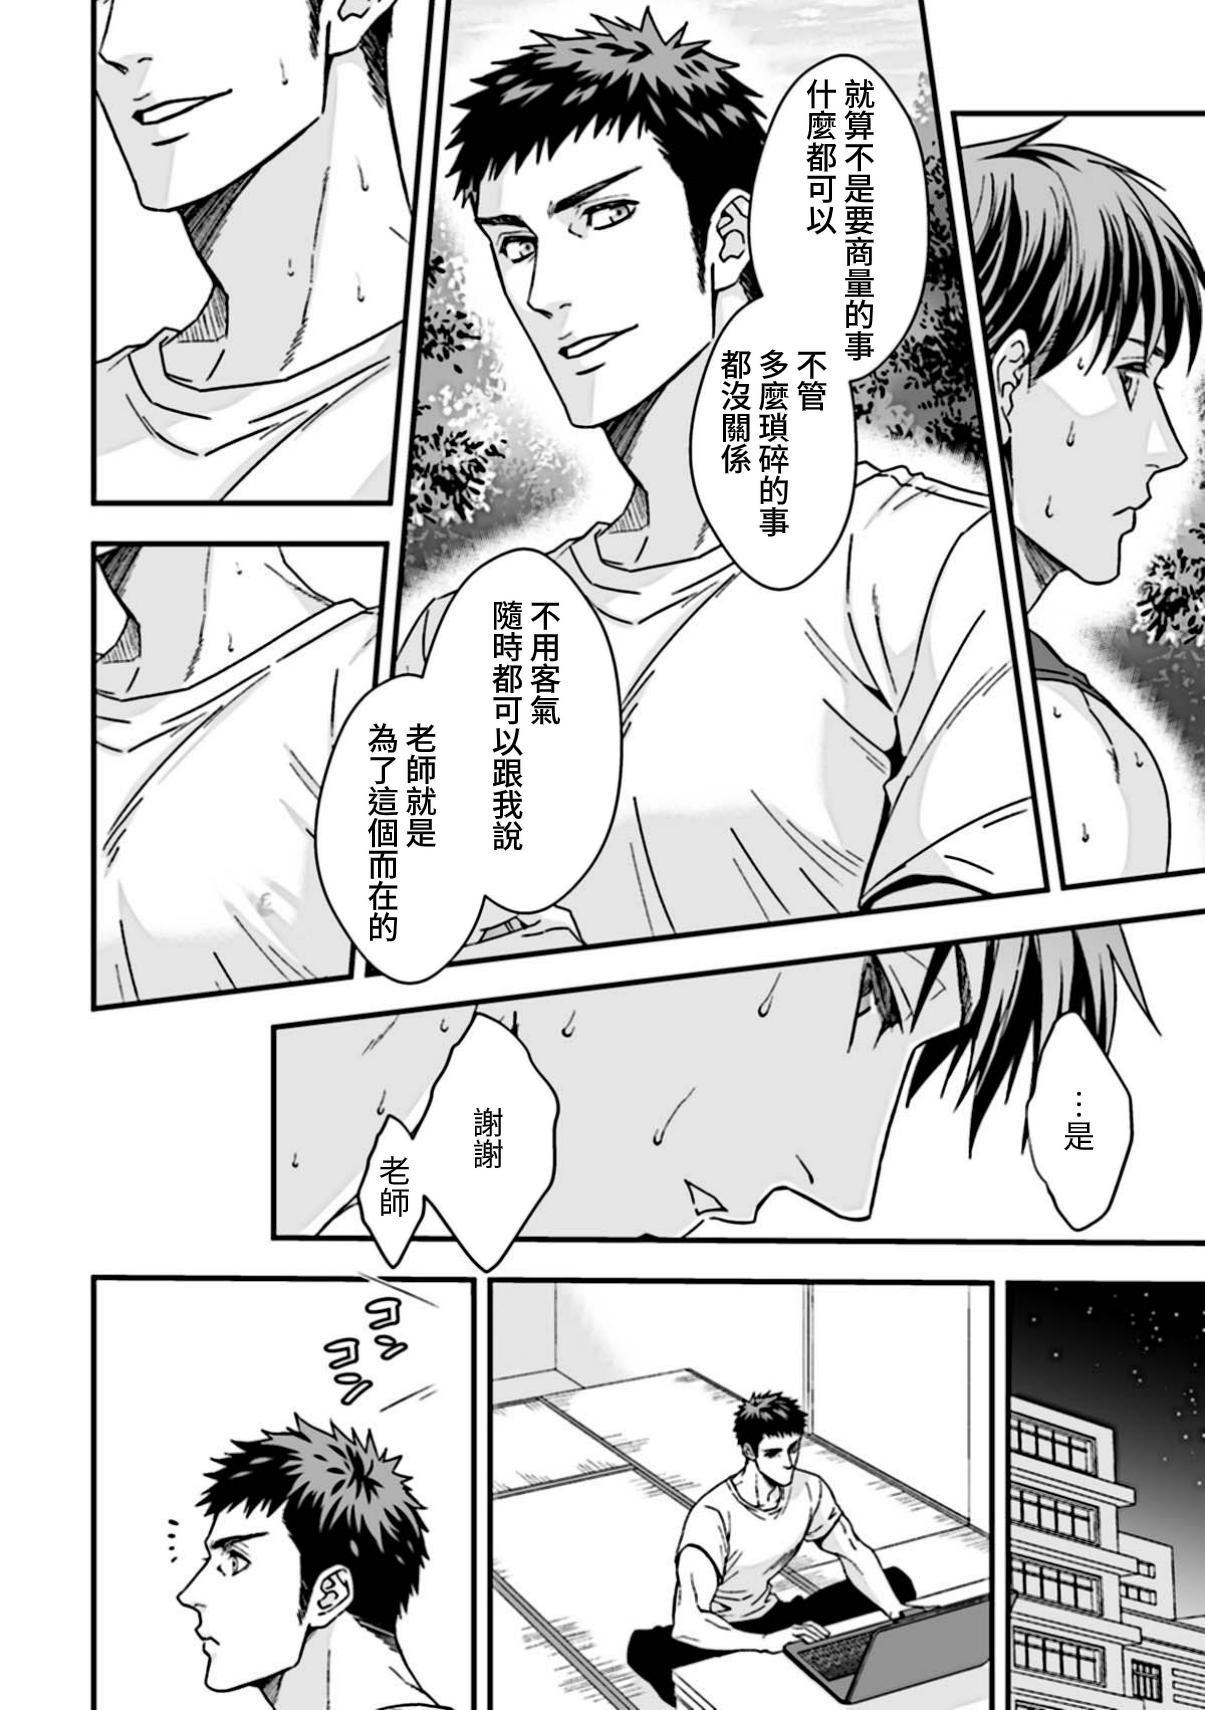 Transexual 體育教師2 Sis - Page 4